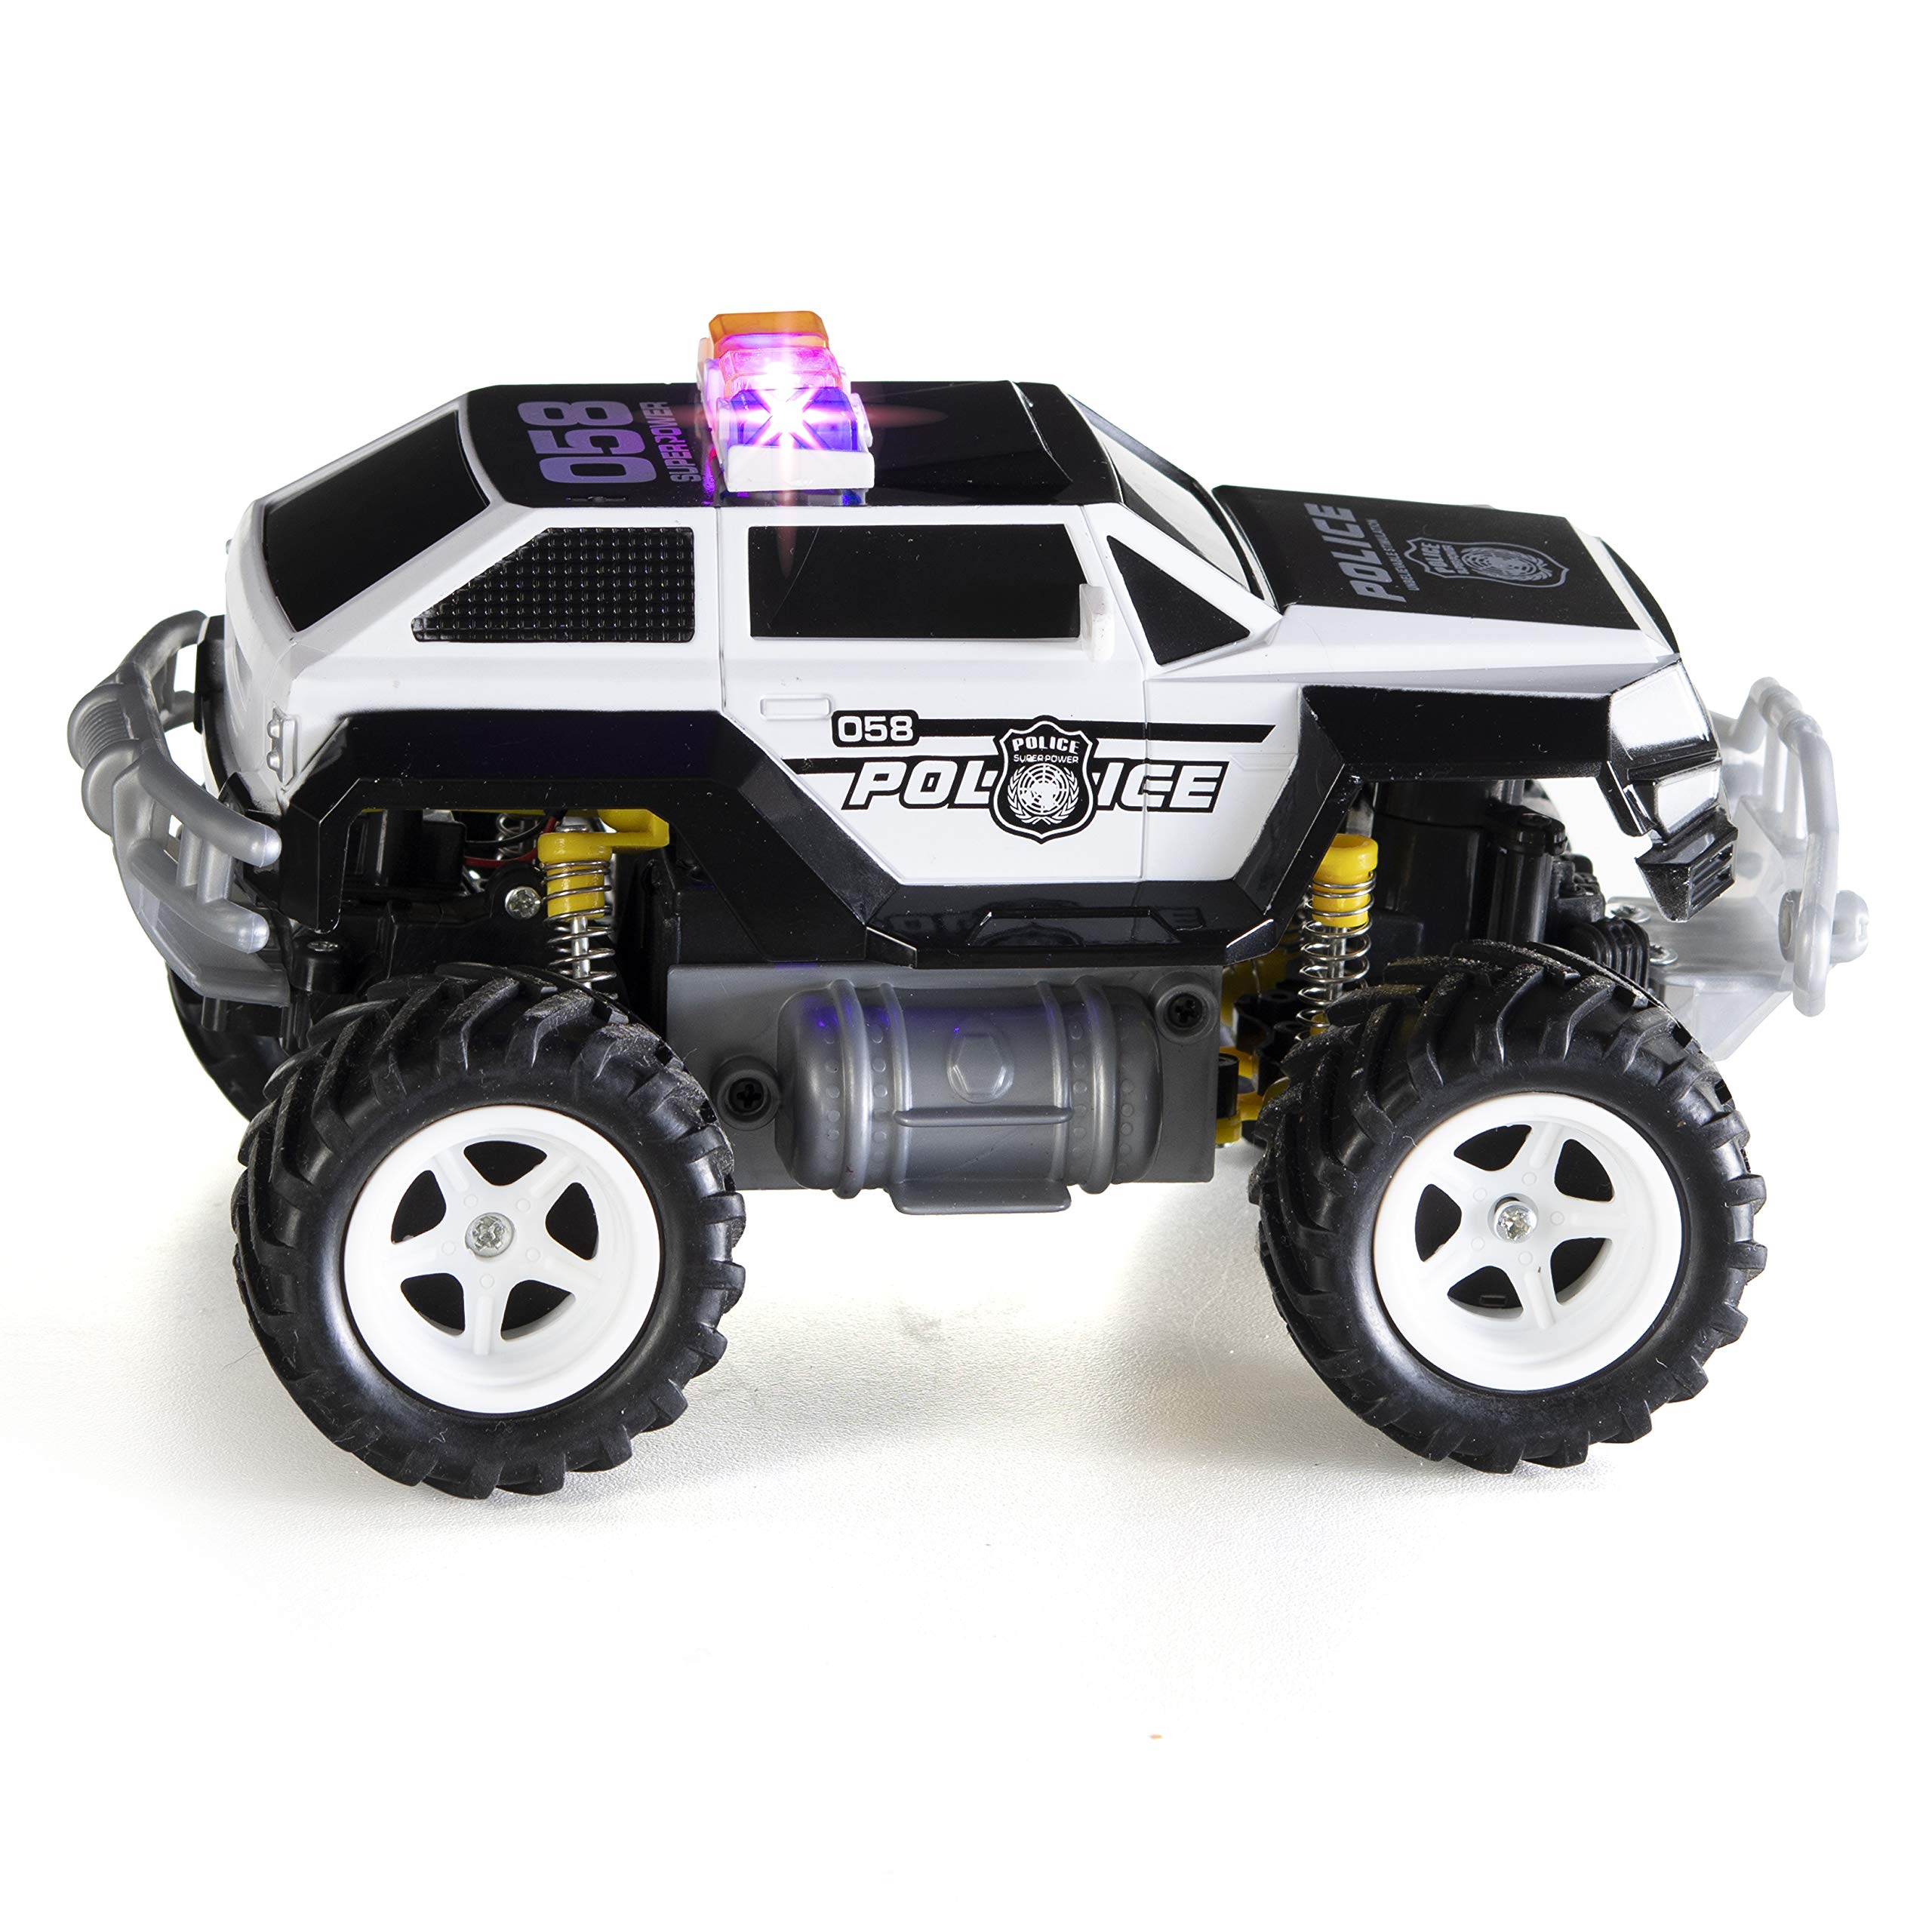 PREXTEX Remote Control Monster Police Truck Radio Control Police Car Toys for Boys Rc Car with Lights for 3+ Year Old Boys